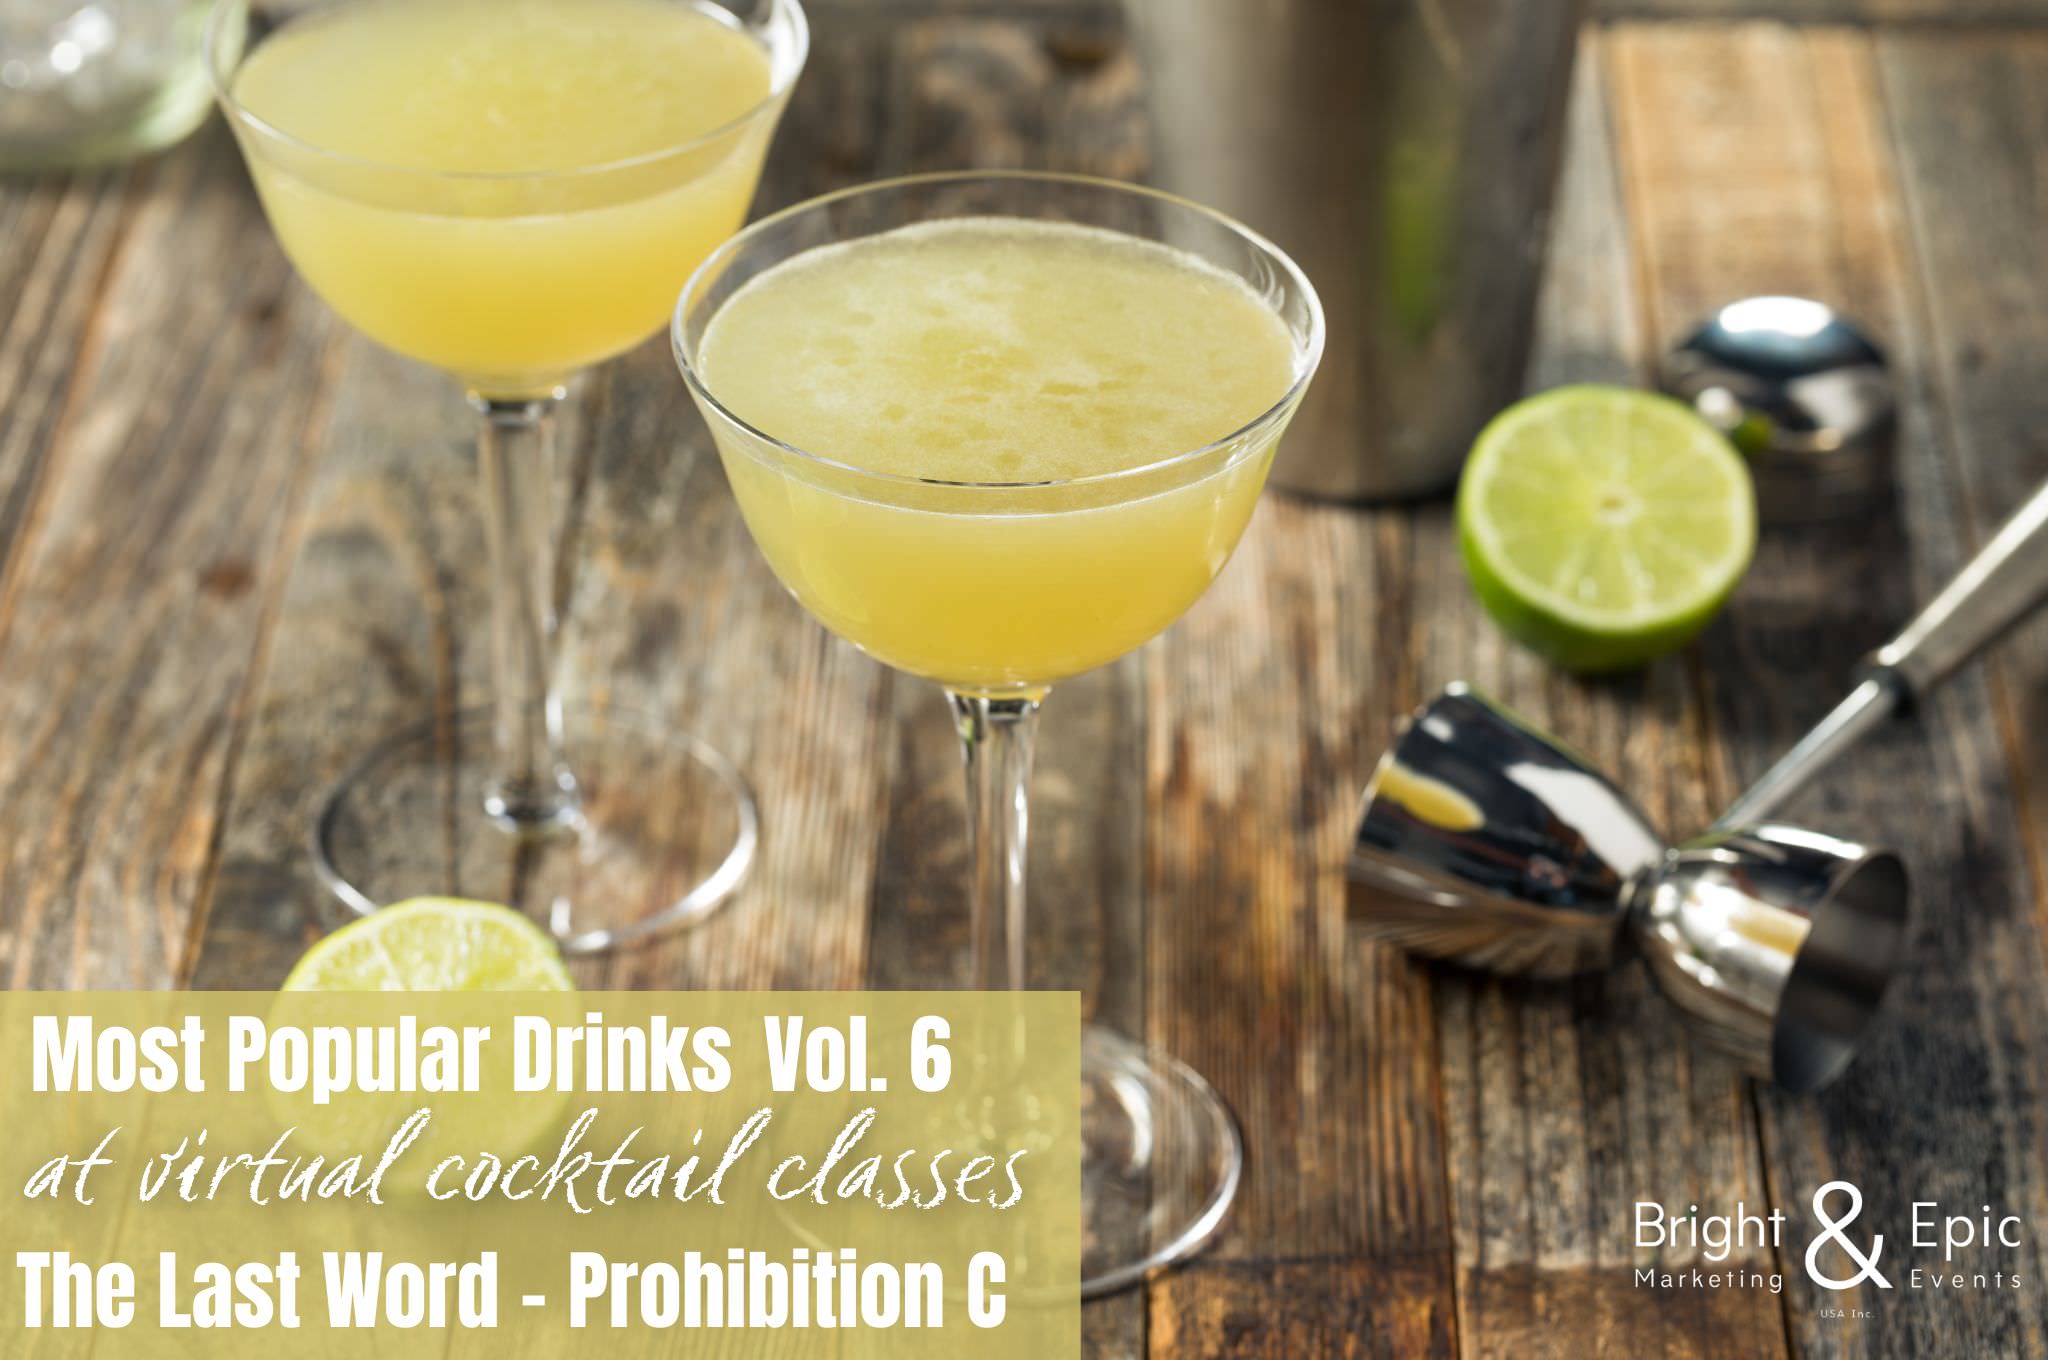 Virtual Cocktail Classes - Most popular cocktails Vol. 6 - The Last Word - the Prohibition Cocktail - brightandepic USA virtual Team Building Activities